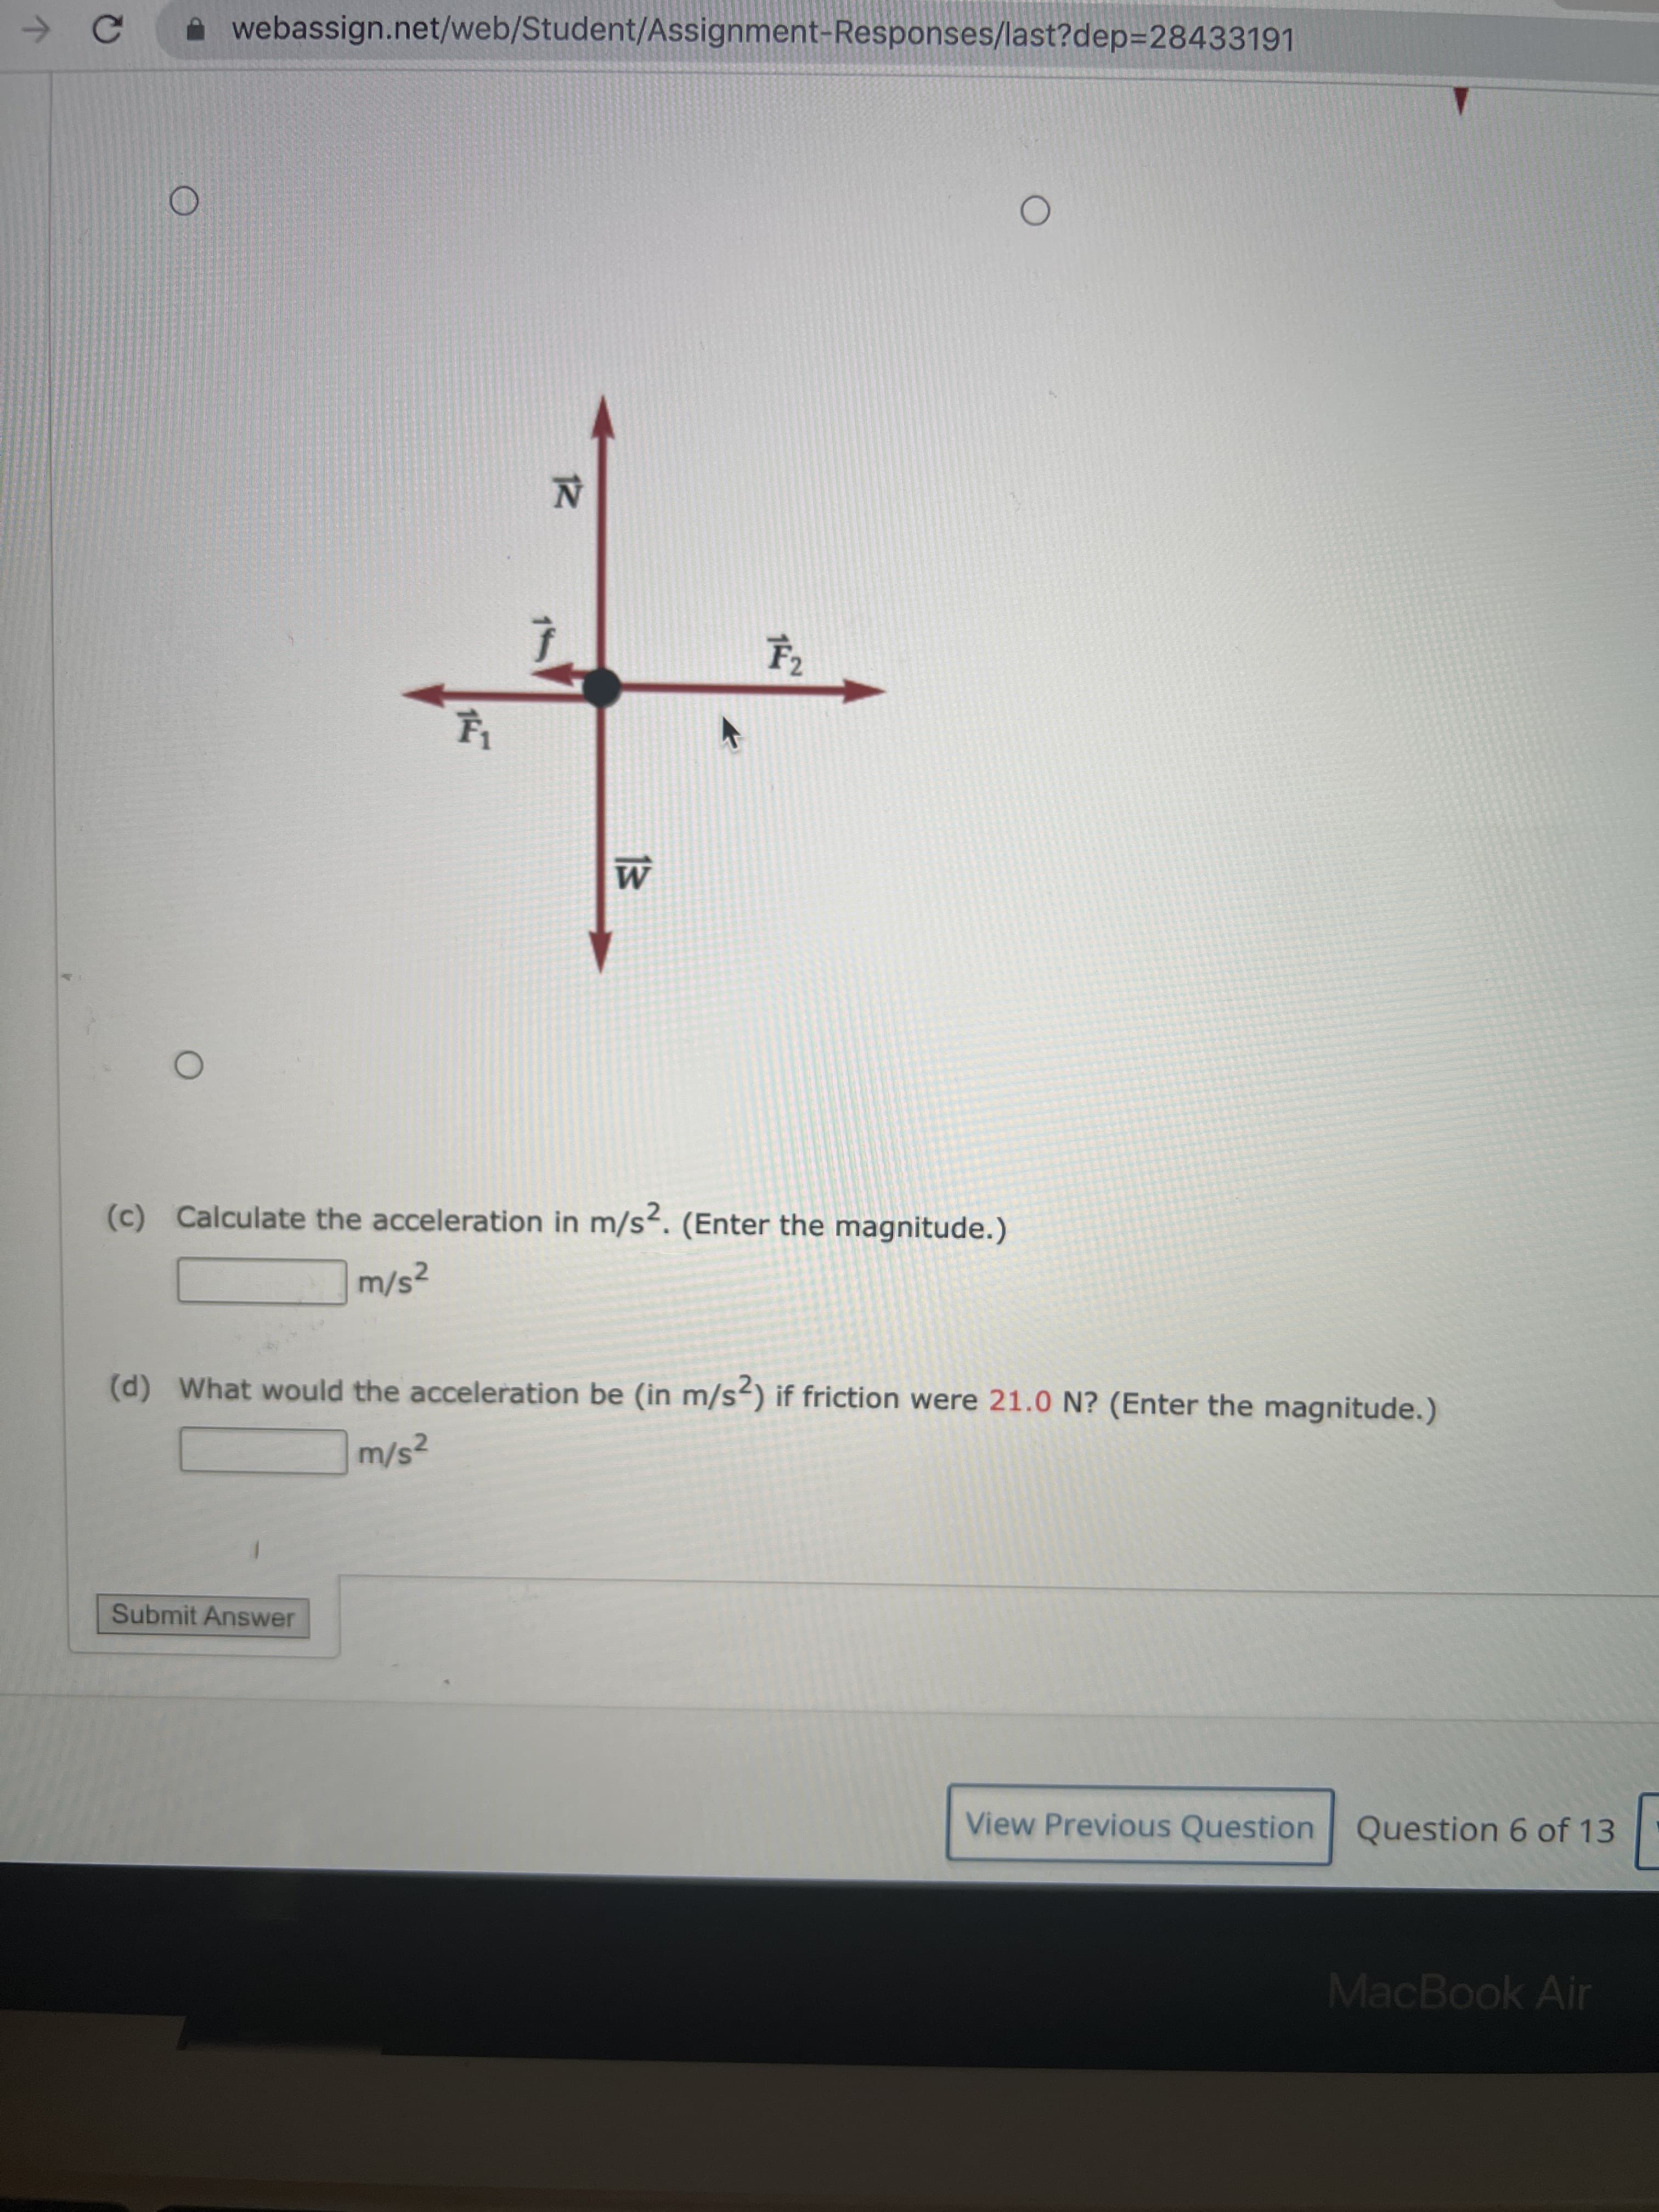 → C
O
webassign.net/web/Student/Assignment-Responses/last?dep=28433191
O
14
12
F₂
W
(c) Calculate the acceleration in m/s². (Enter the magnitude.)
m/s²
(d) What would the acceleration be (in m/s2) if friction were 21.0 N? (Enter the magnitude.)
m/s²
Submit Answer
View Previous Question Question 6 of 13
MacBook Air